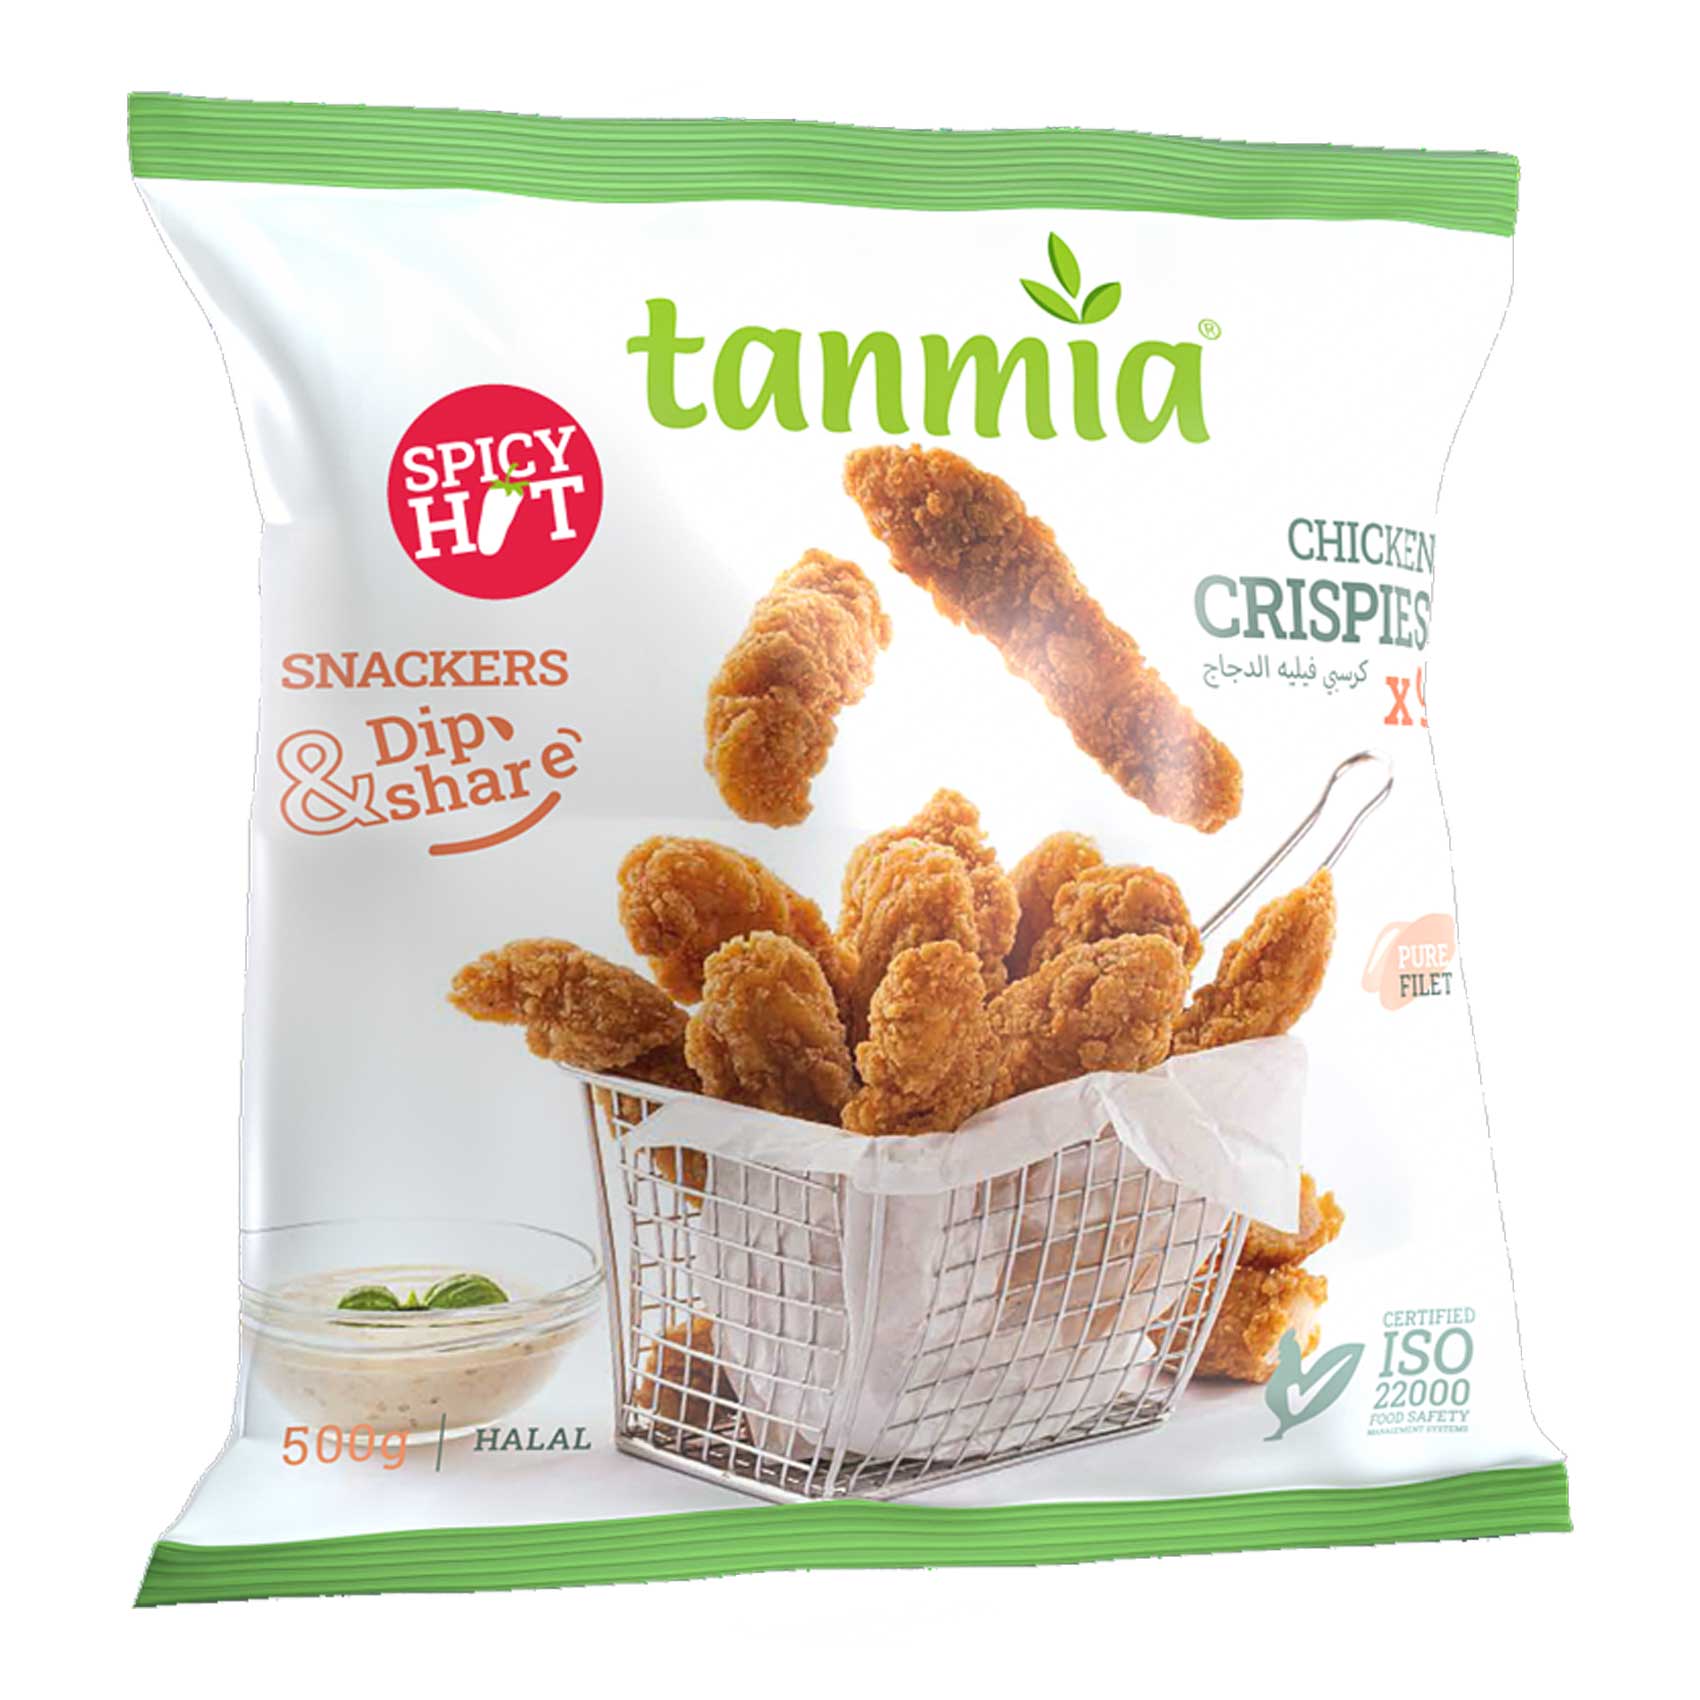 Tanmia Crispy Chicken Spicy 500GR